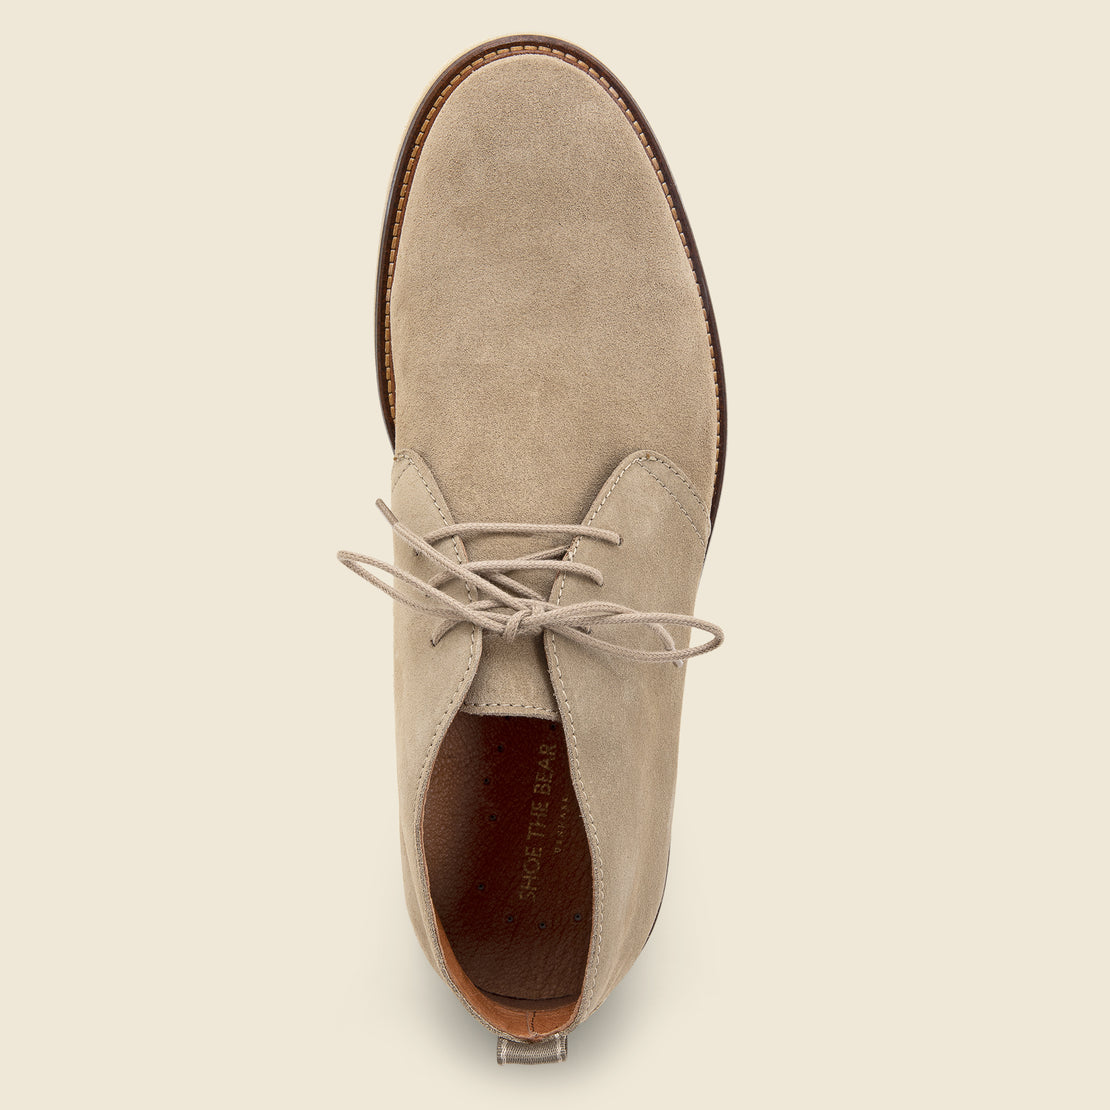 Kip Suede Chukka Boot - Sand - Shoe the Bear - STAG Provisions - Shoes - Boots / Chukkas